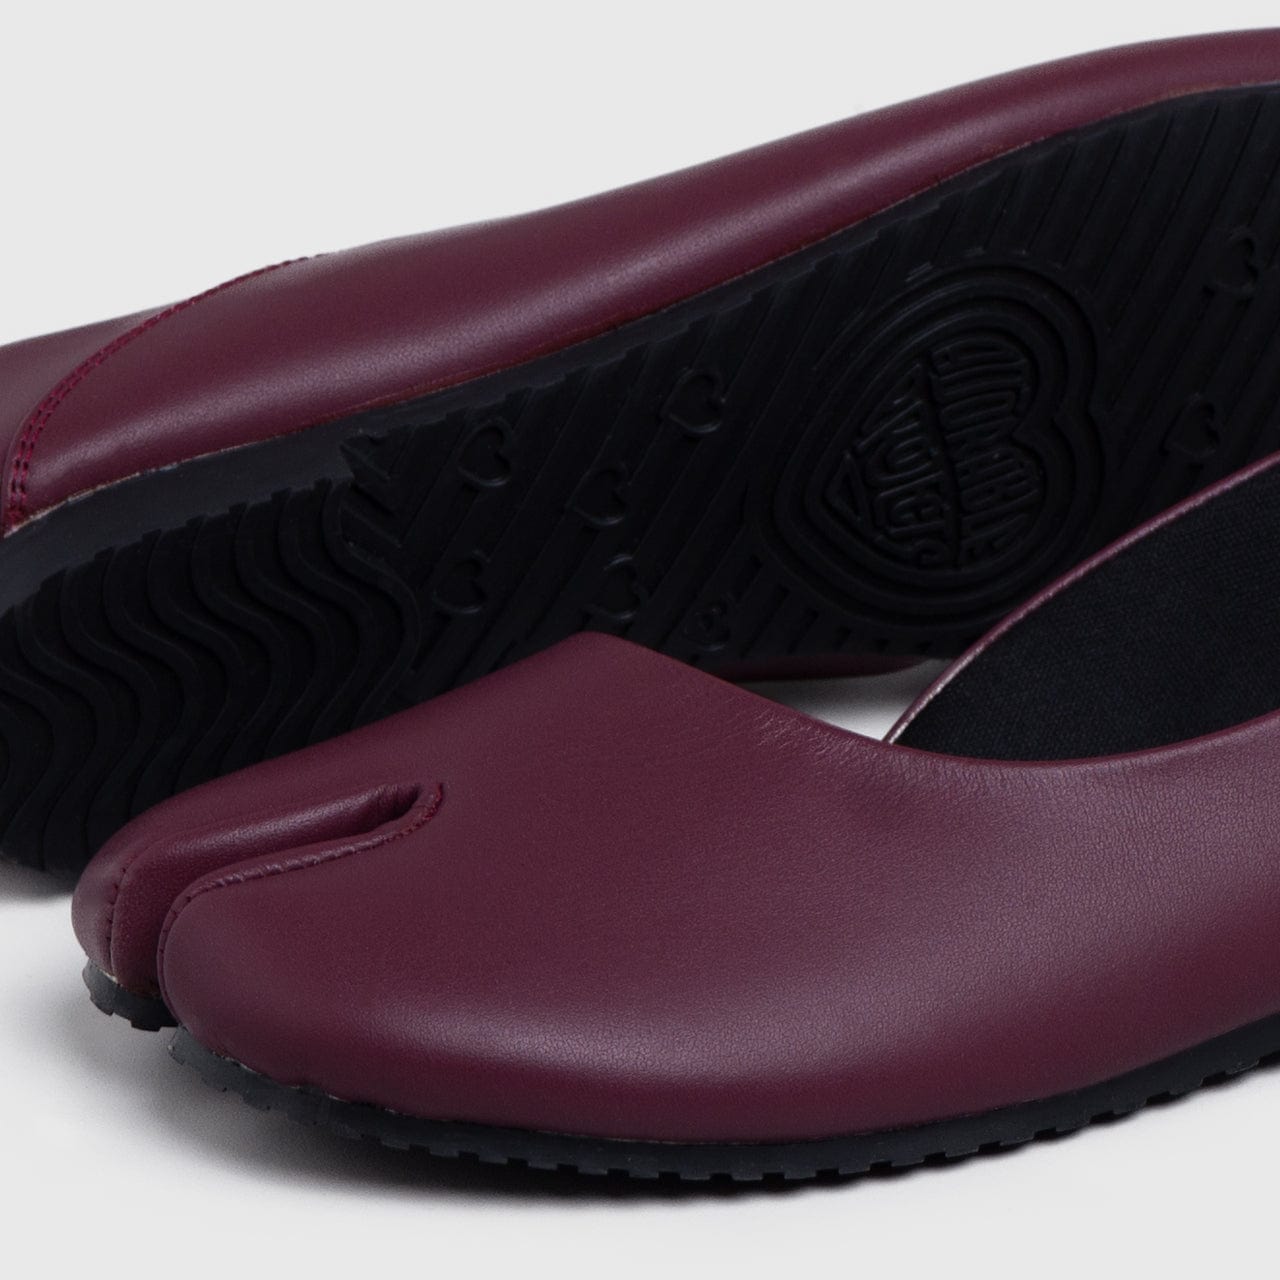 Adorable Projects Official Adorableprojects - Lulula Flat Shoes Genuine Leather Wild Ginger